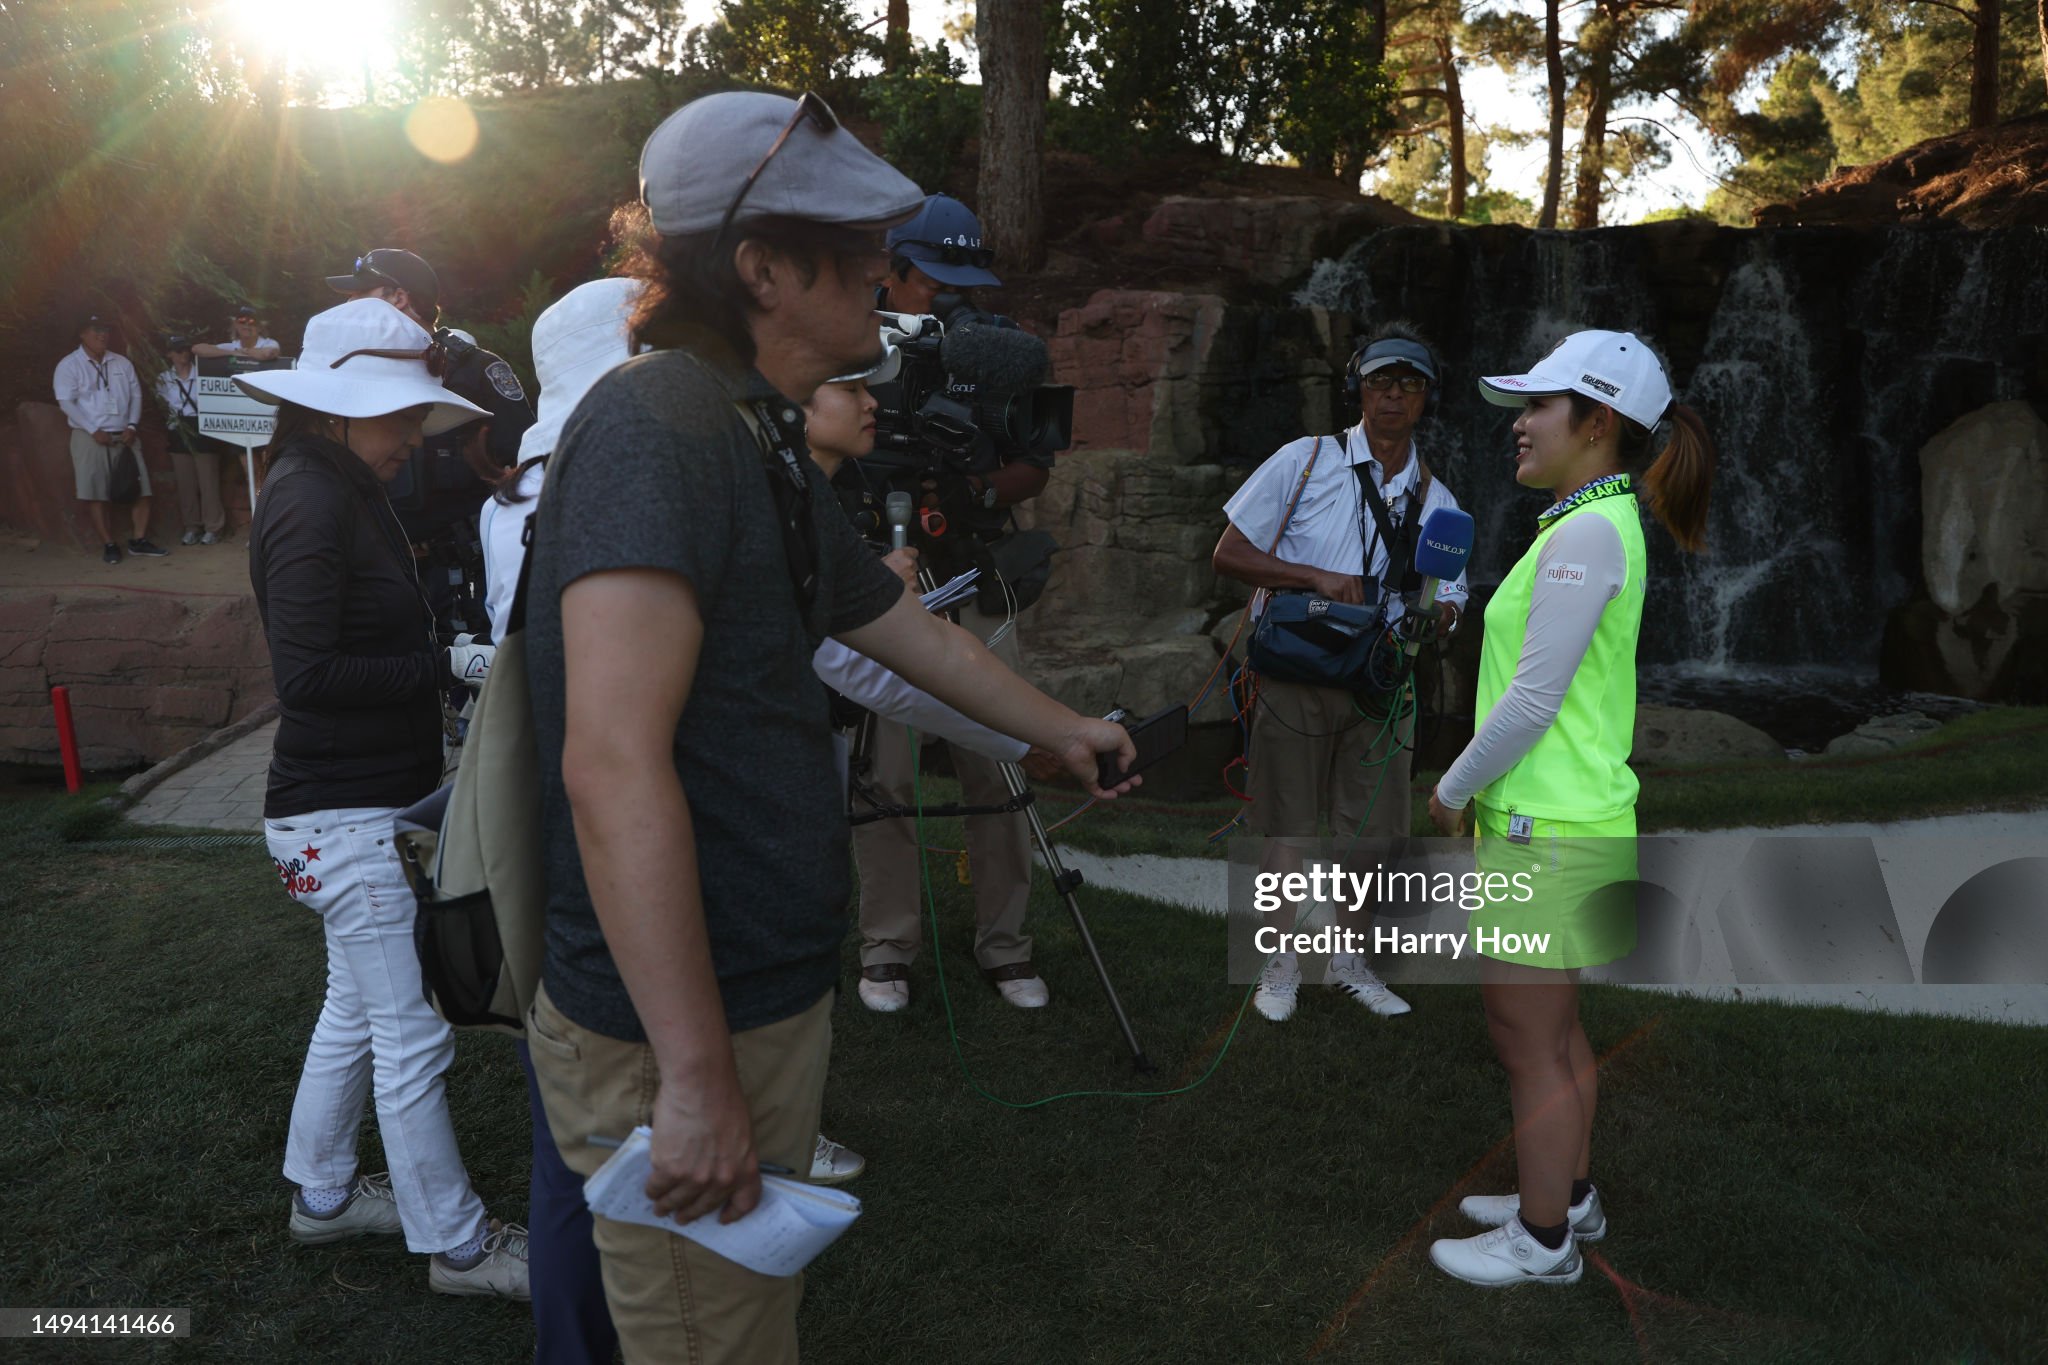 https://media.gettyimages.com/id/1494141466/photo/bank-of-hope-lpga-match-play-presented-by-mgm-rewards-day-five.jpg?s=2048x2048&w=gi&k=20&c=6-eTc9yvzm7LPD2H3kukeC9b8_iupBzkiSt6mzi8zOg=